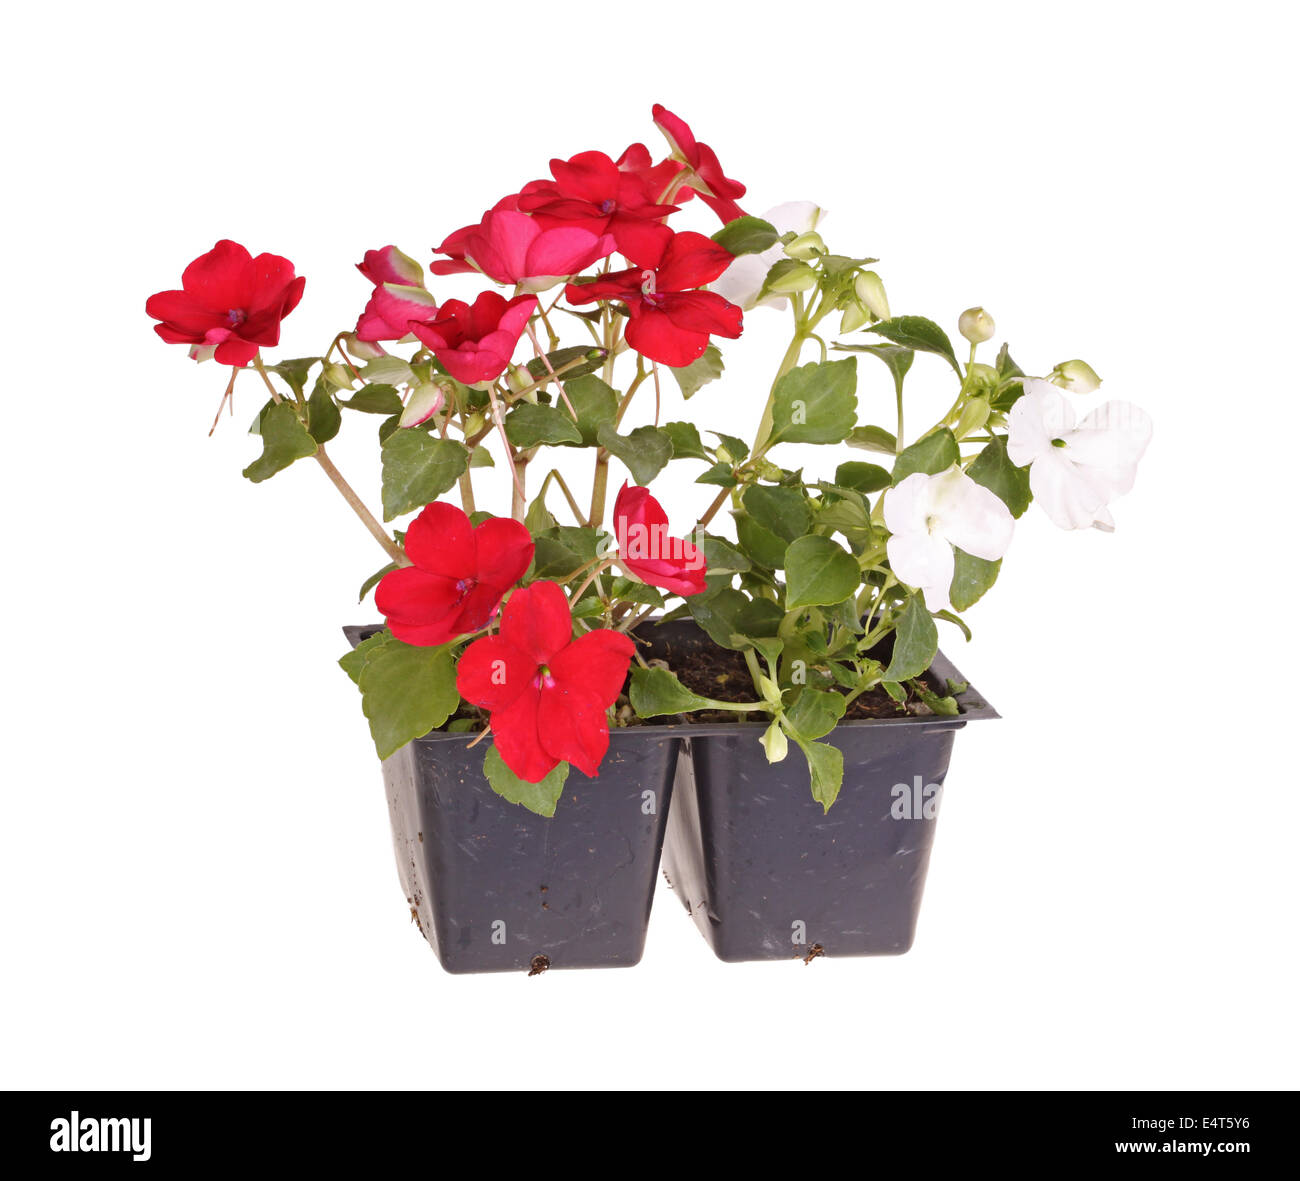 Pack containing two seedlings of impatiens plants (Impatiens wallerana) flowering in red and white ready for transplanting into Stock Photo